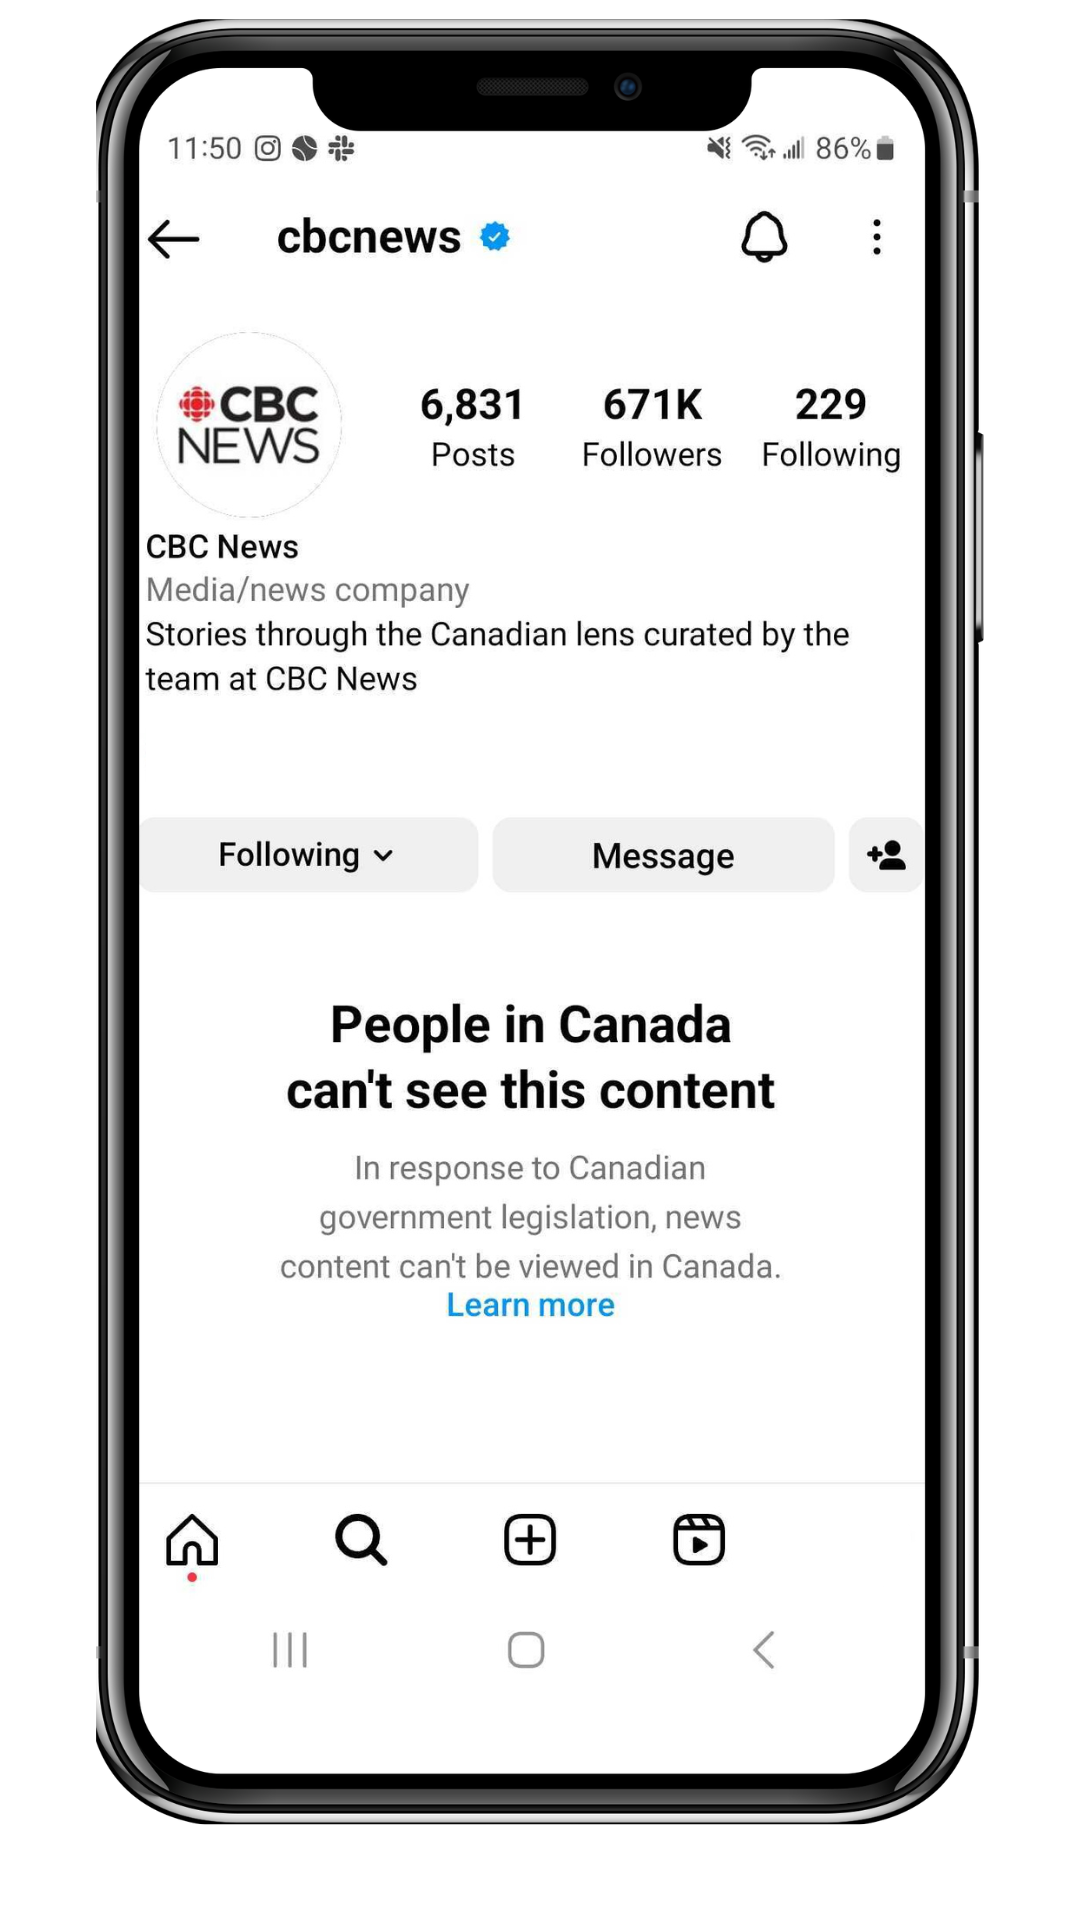 Screenshot of CBC Instagram showing message that "People in Canada can't see this content"